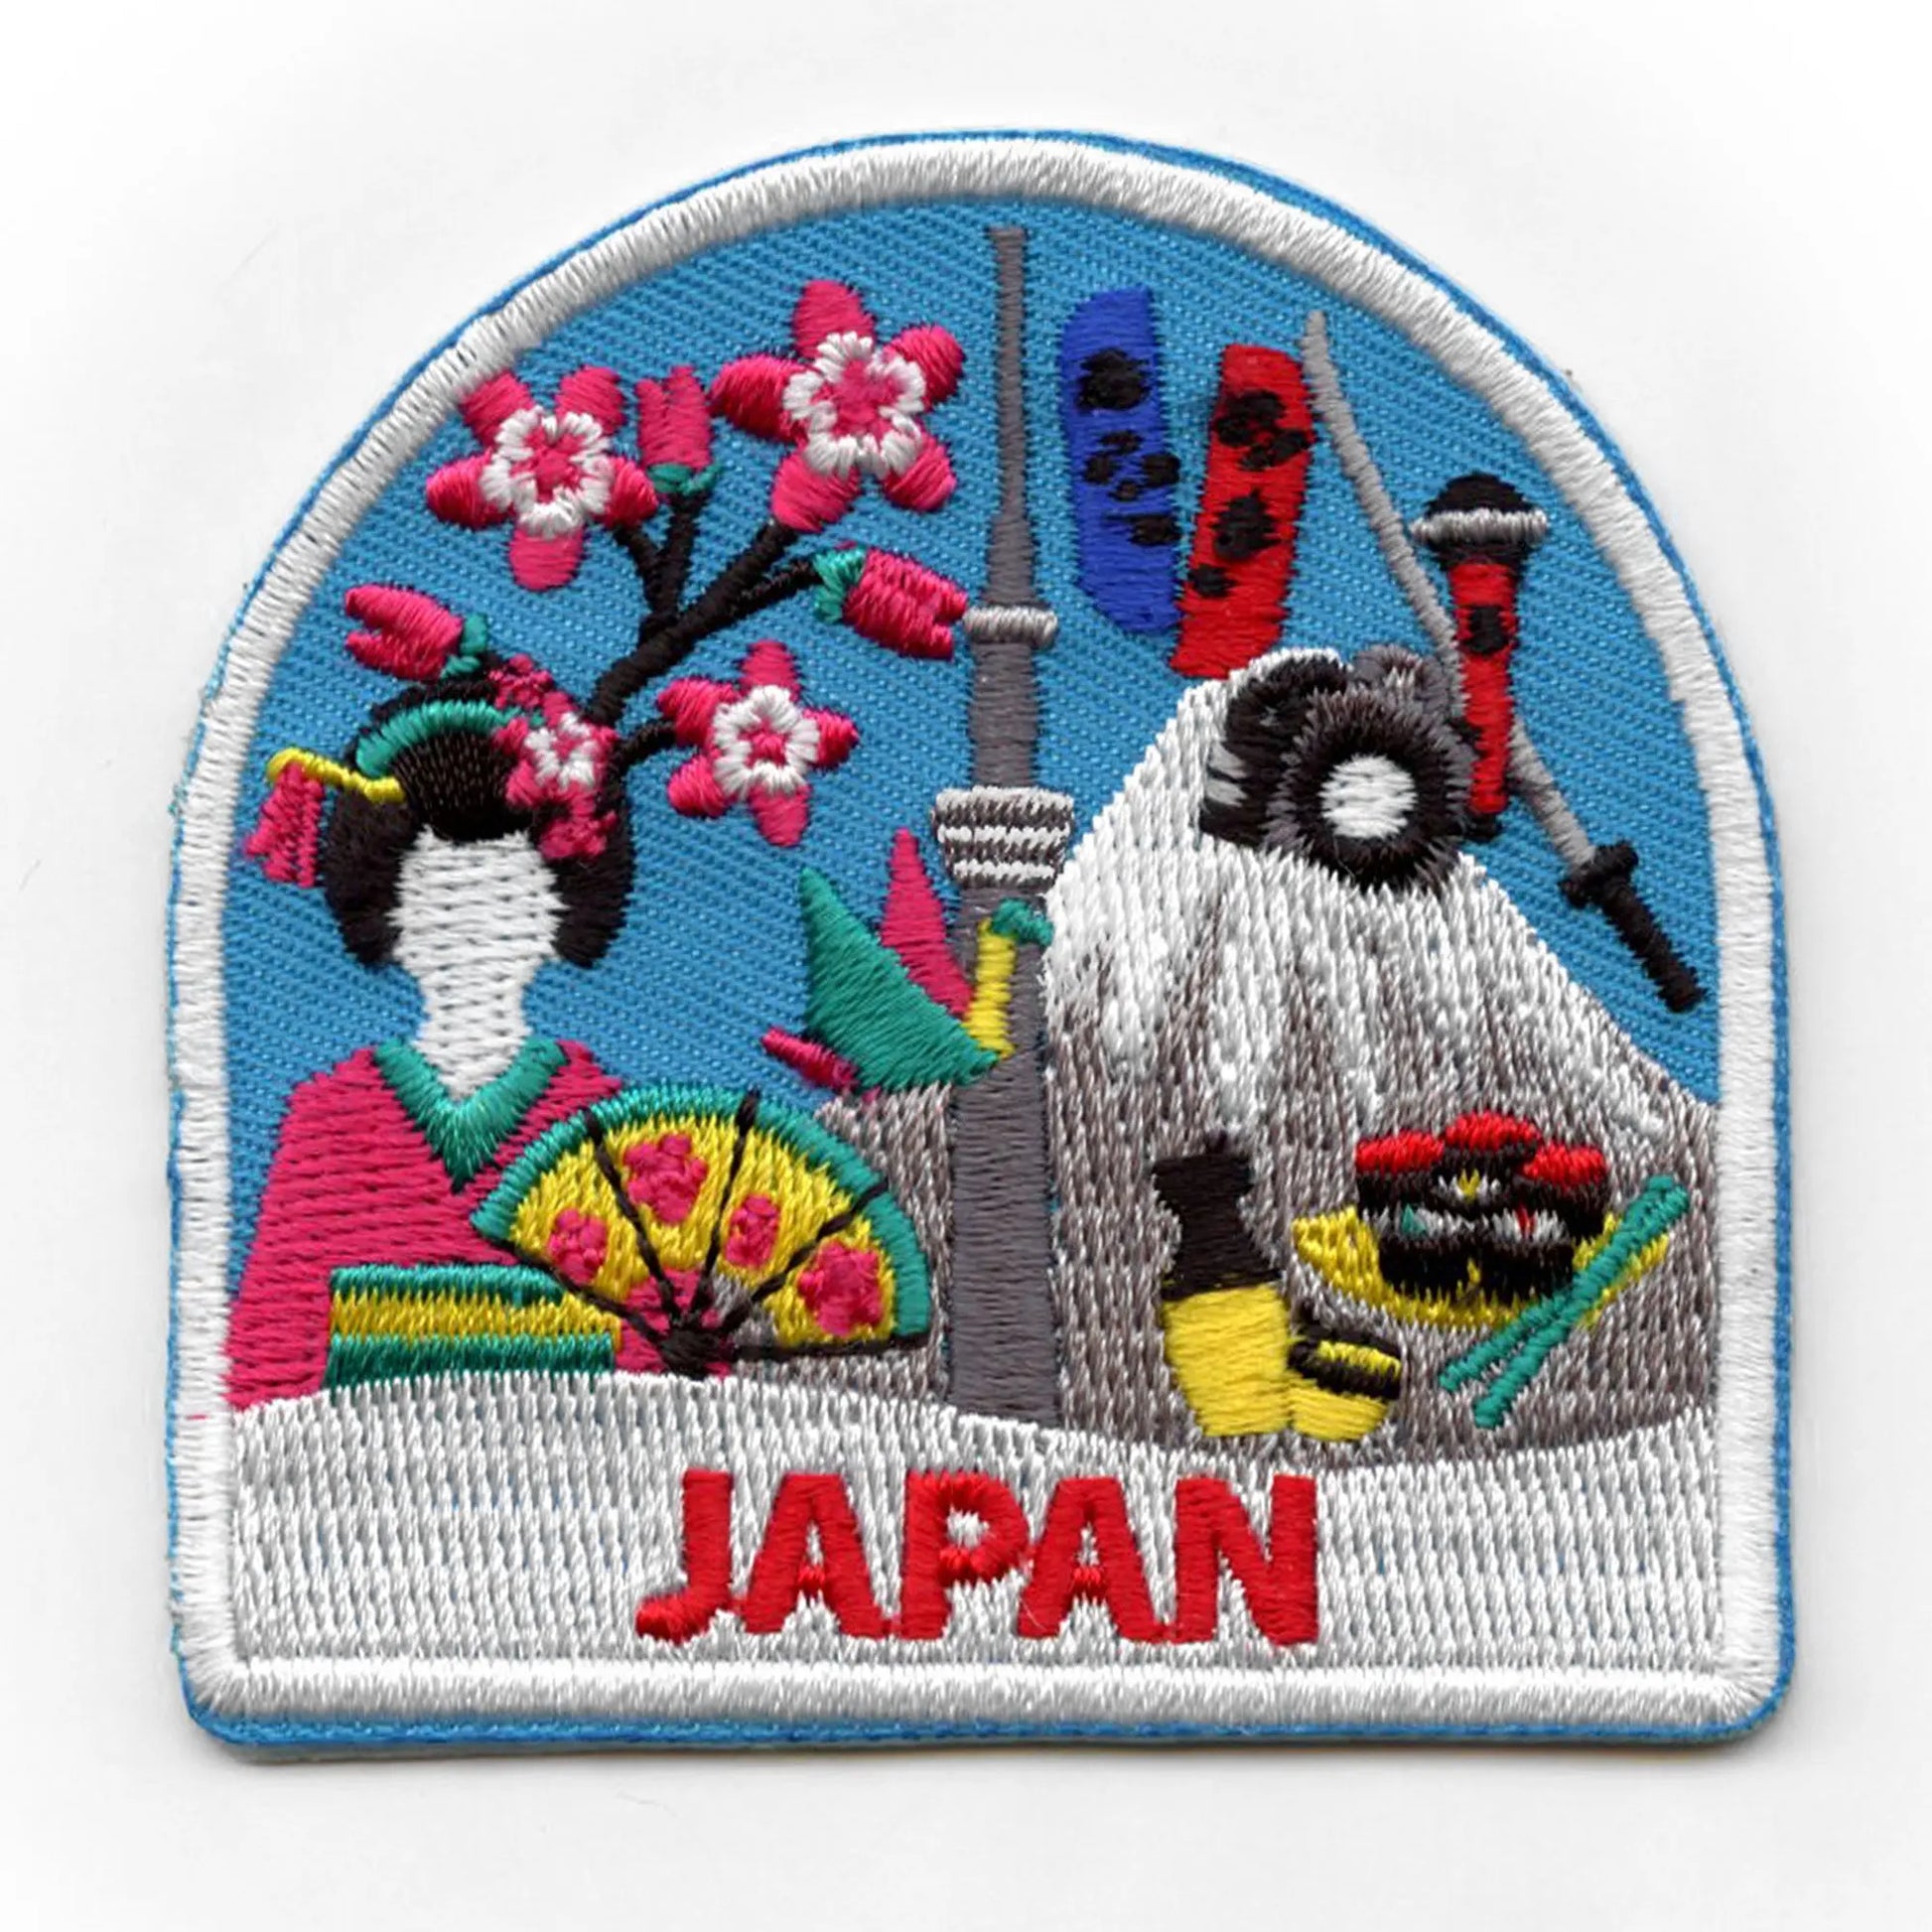 Japan World Showcase Travel Patch Souvenir Tokyo Vacation Embroidered Iron On